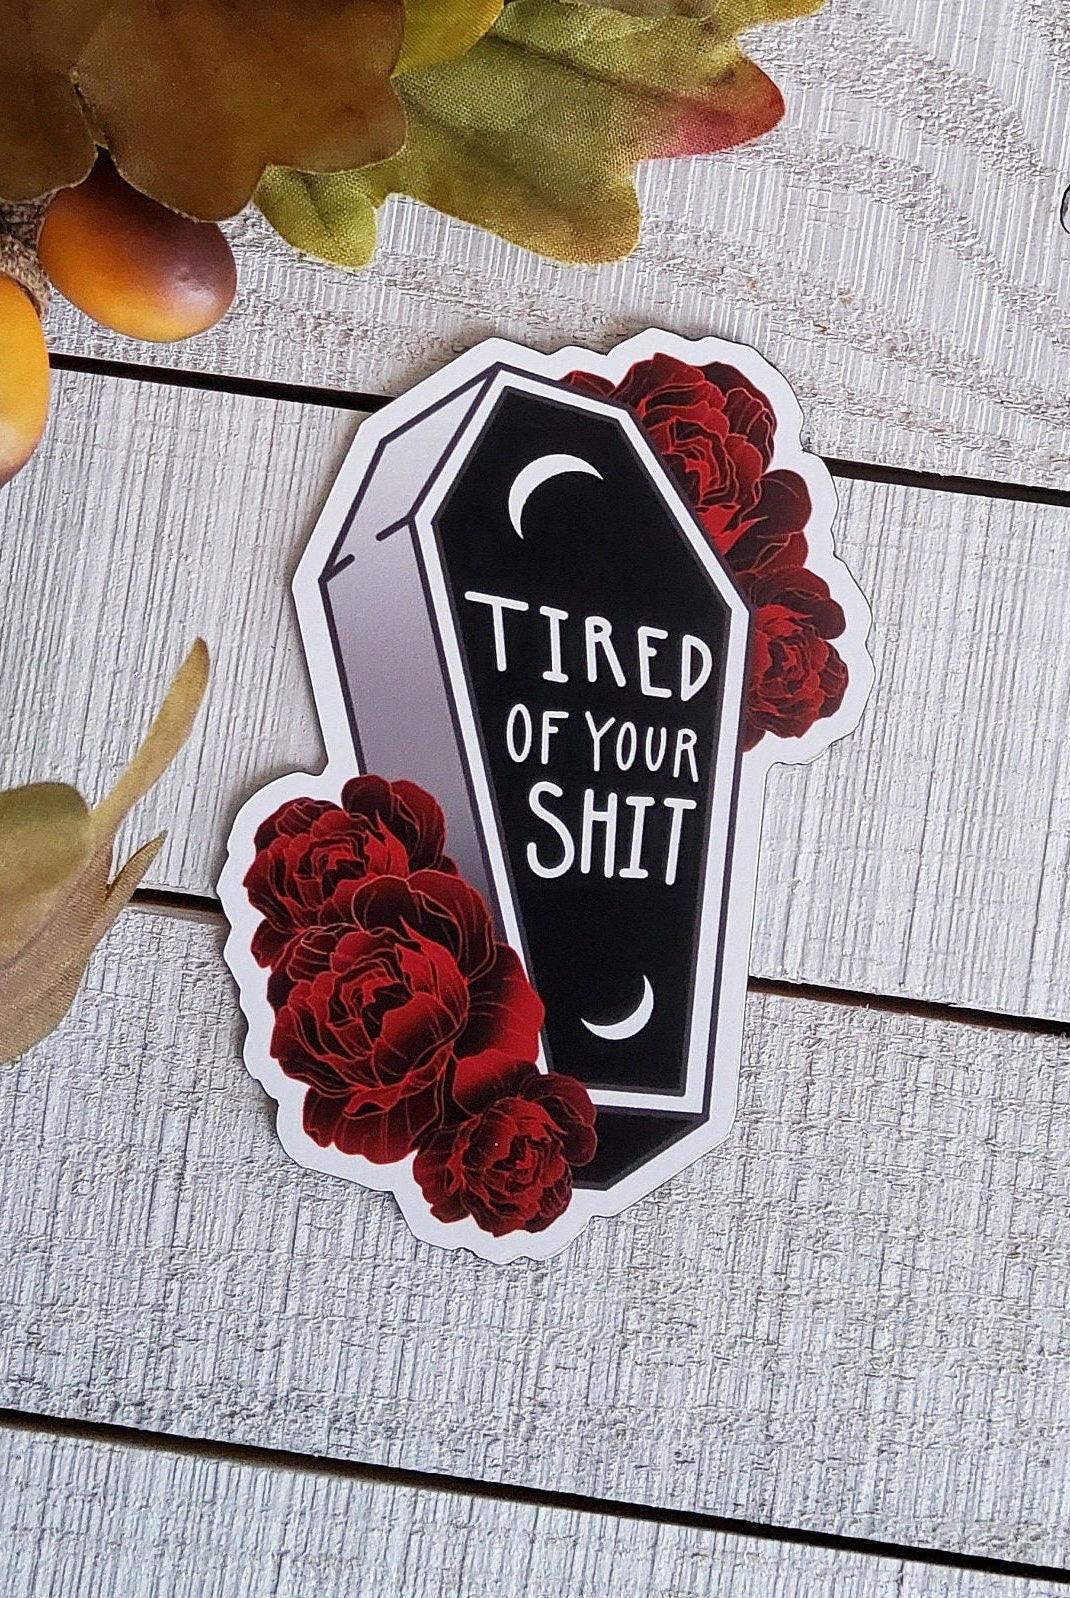 MAGNET: Tired of Your Shit , Tired of Your Shit Coffin Magnet , Coffin and Roses Magnet , Coffin Magnet , Coffin and Roses Sarcasm Magnet